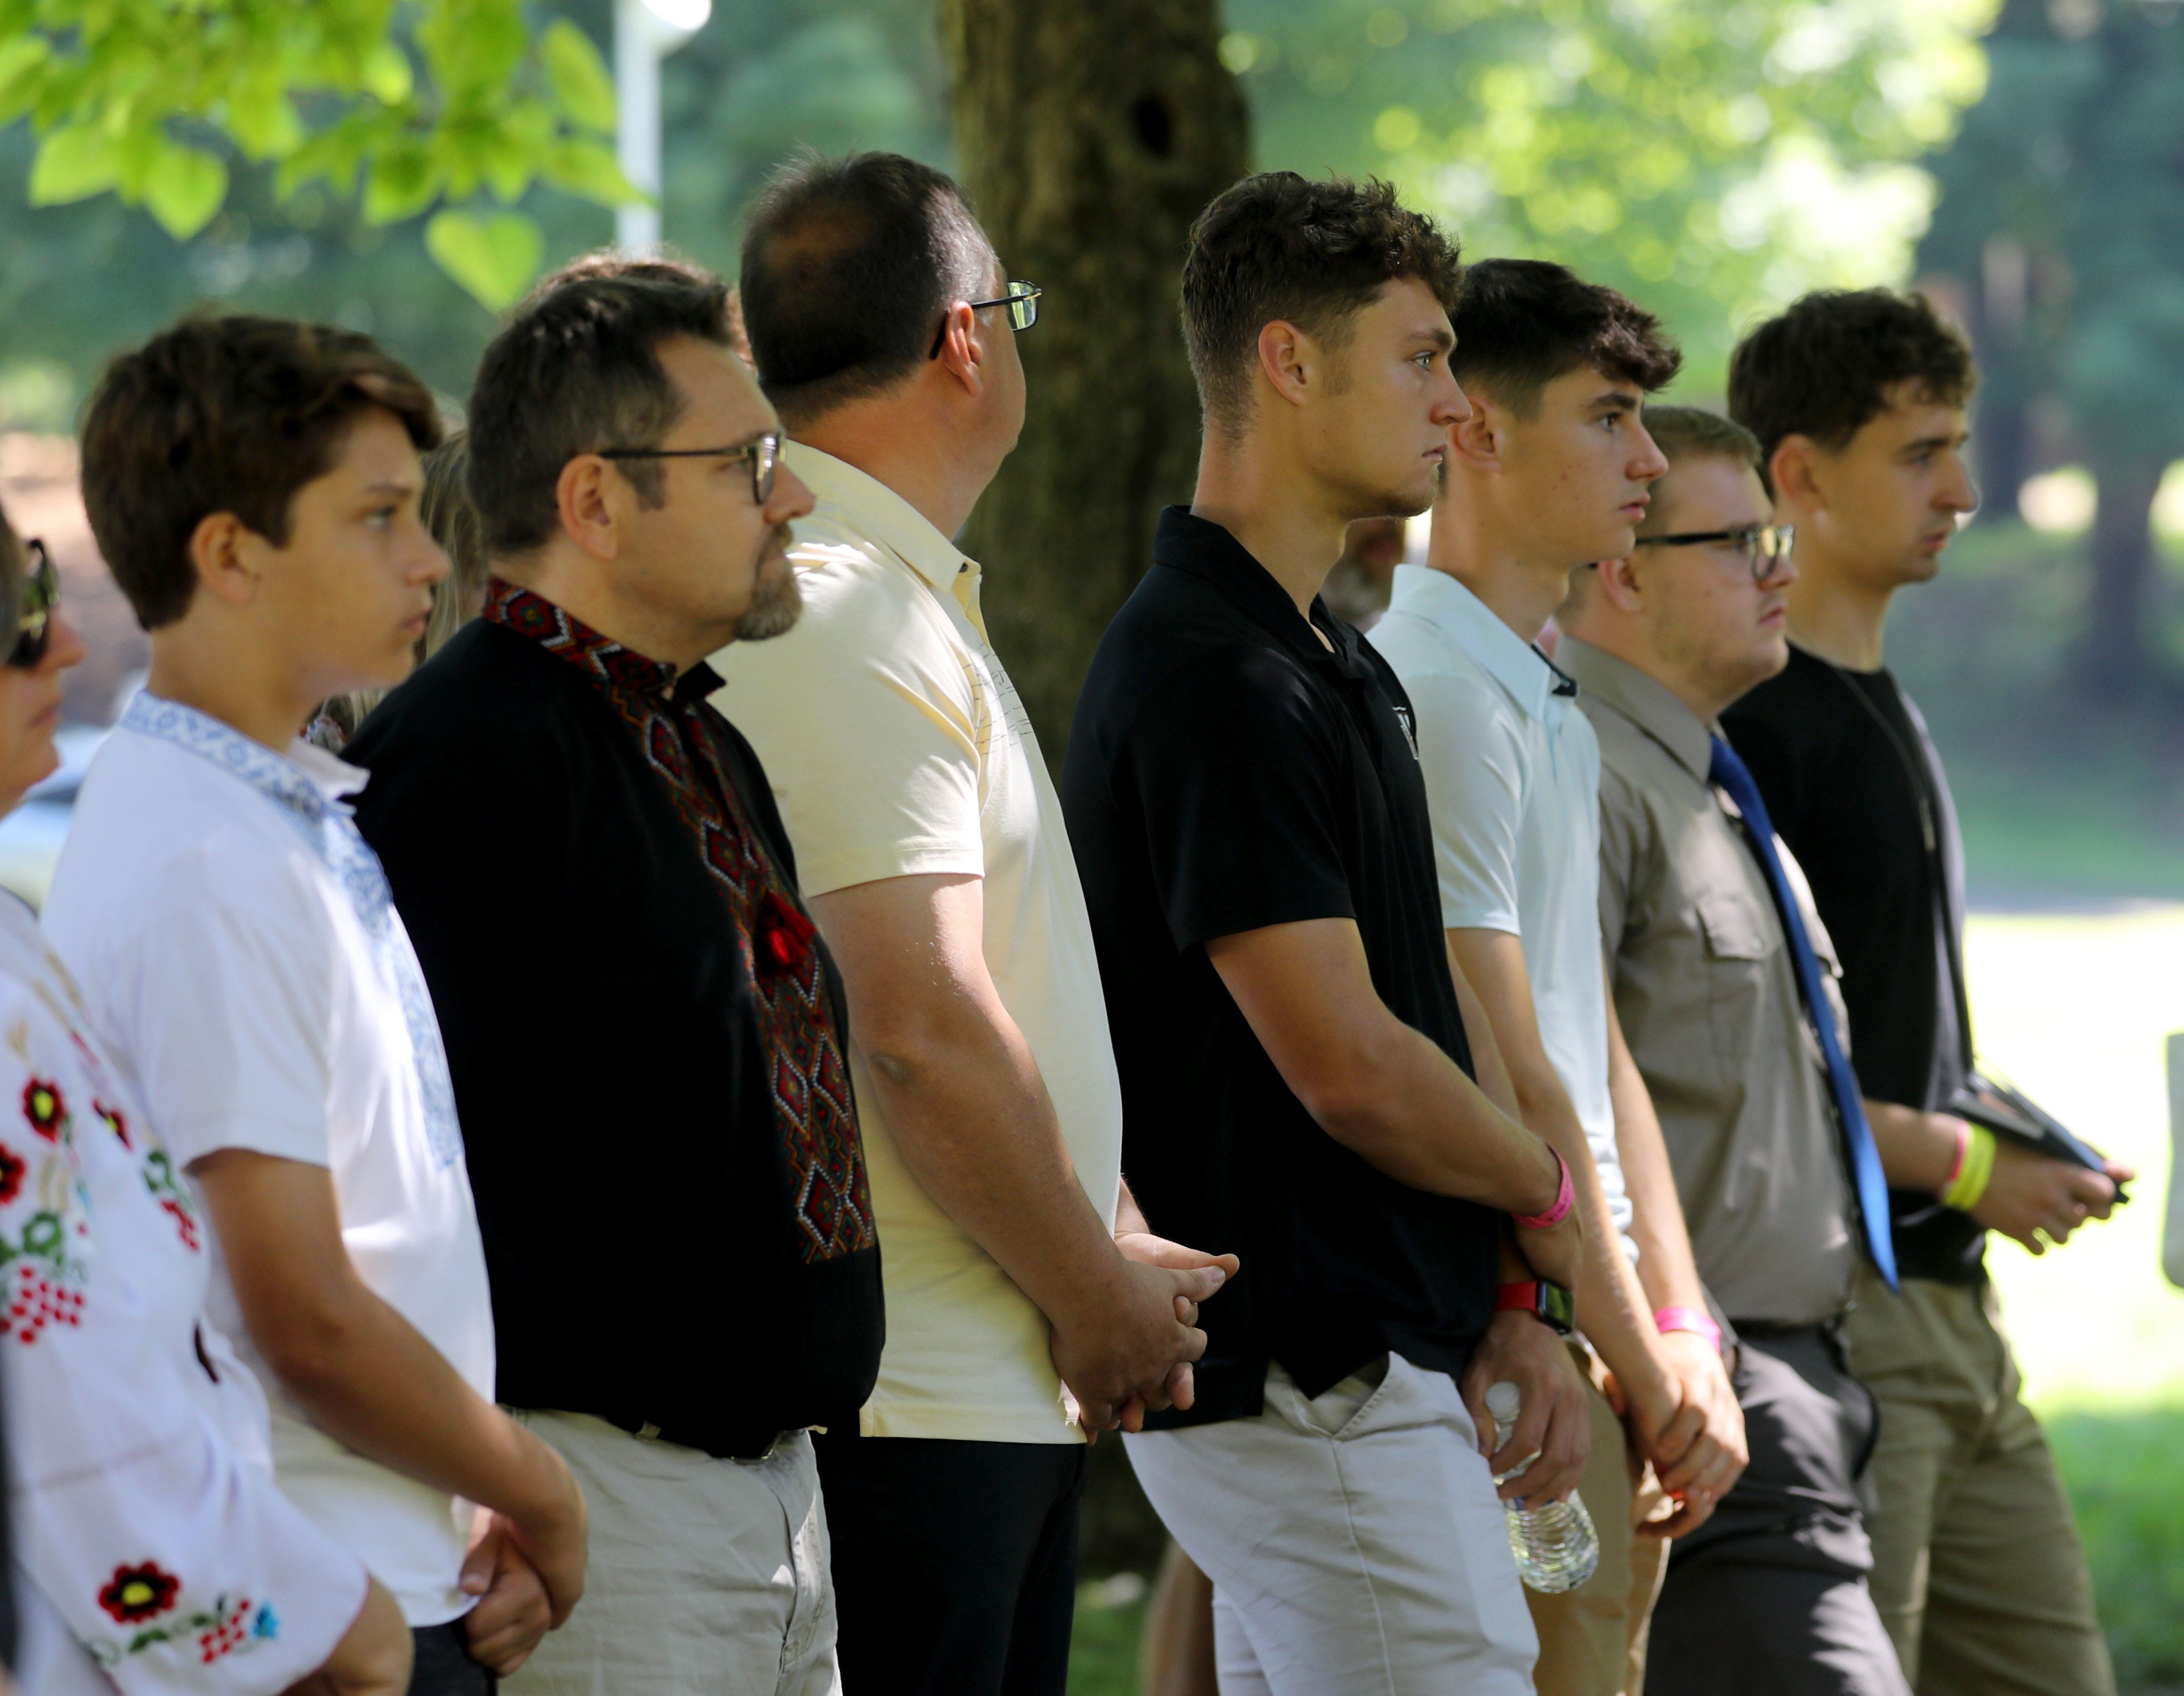 Men attend an outdoor mass in the Ukrainian Greek Catholic Church tradition at the Ukrainian American Youth Association's resort center in Ellenville, New York, on July 3, 2022.